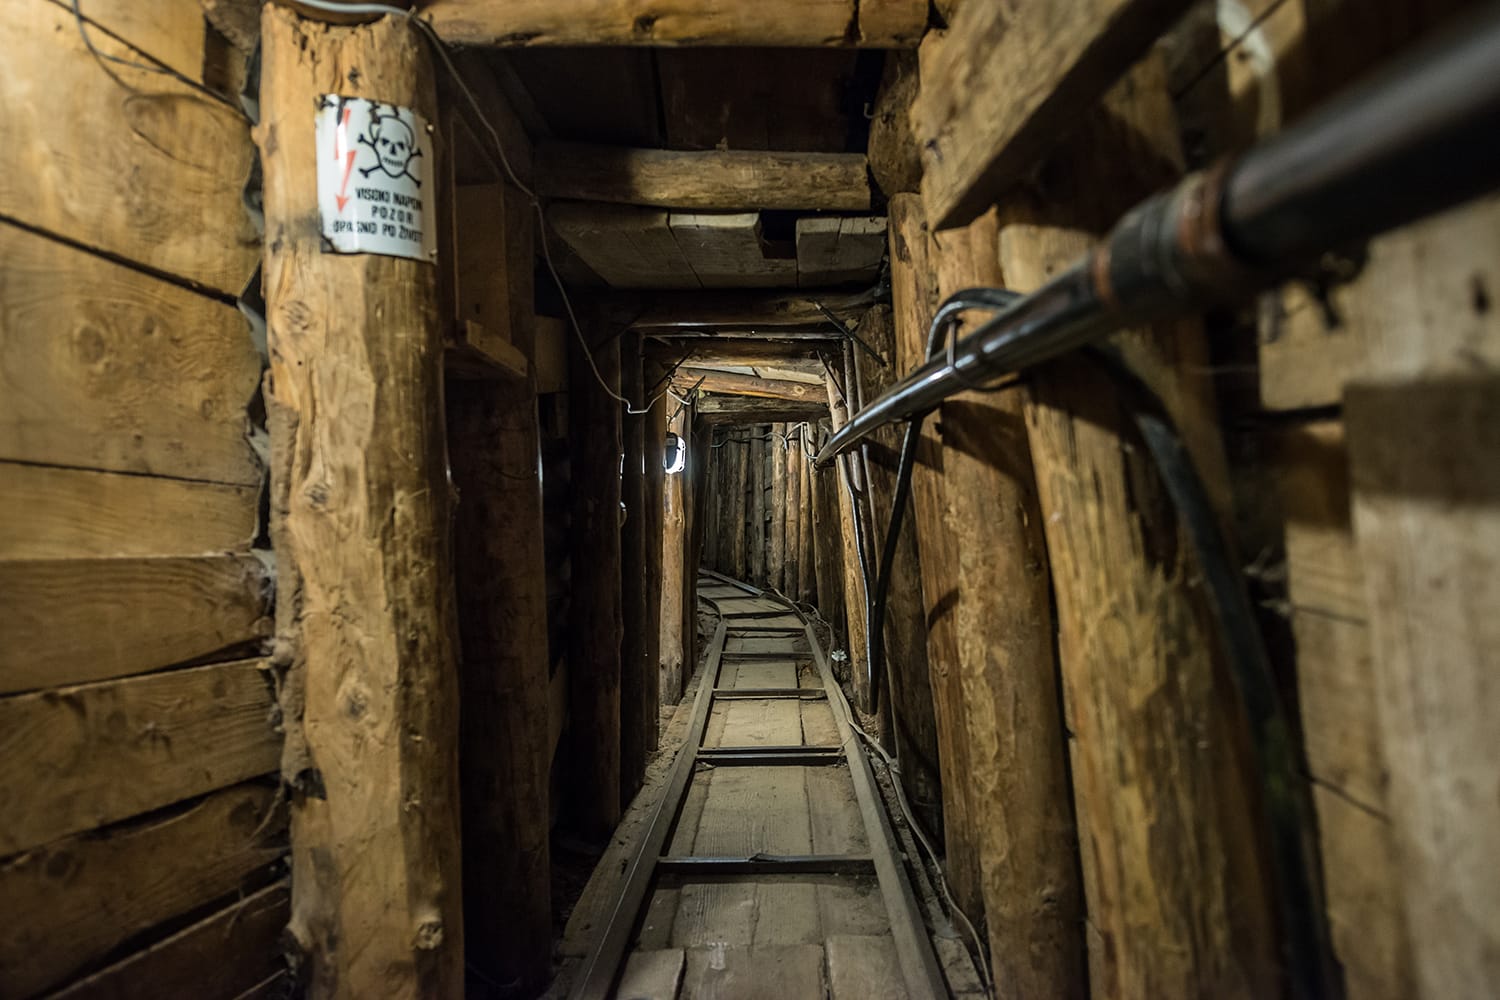 Inside the Sarajevo Tunnel constructed during the Siege of Sarajevo